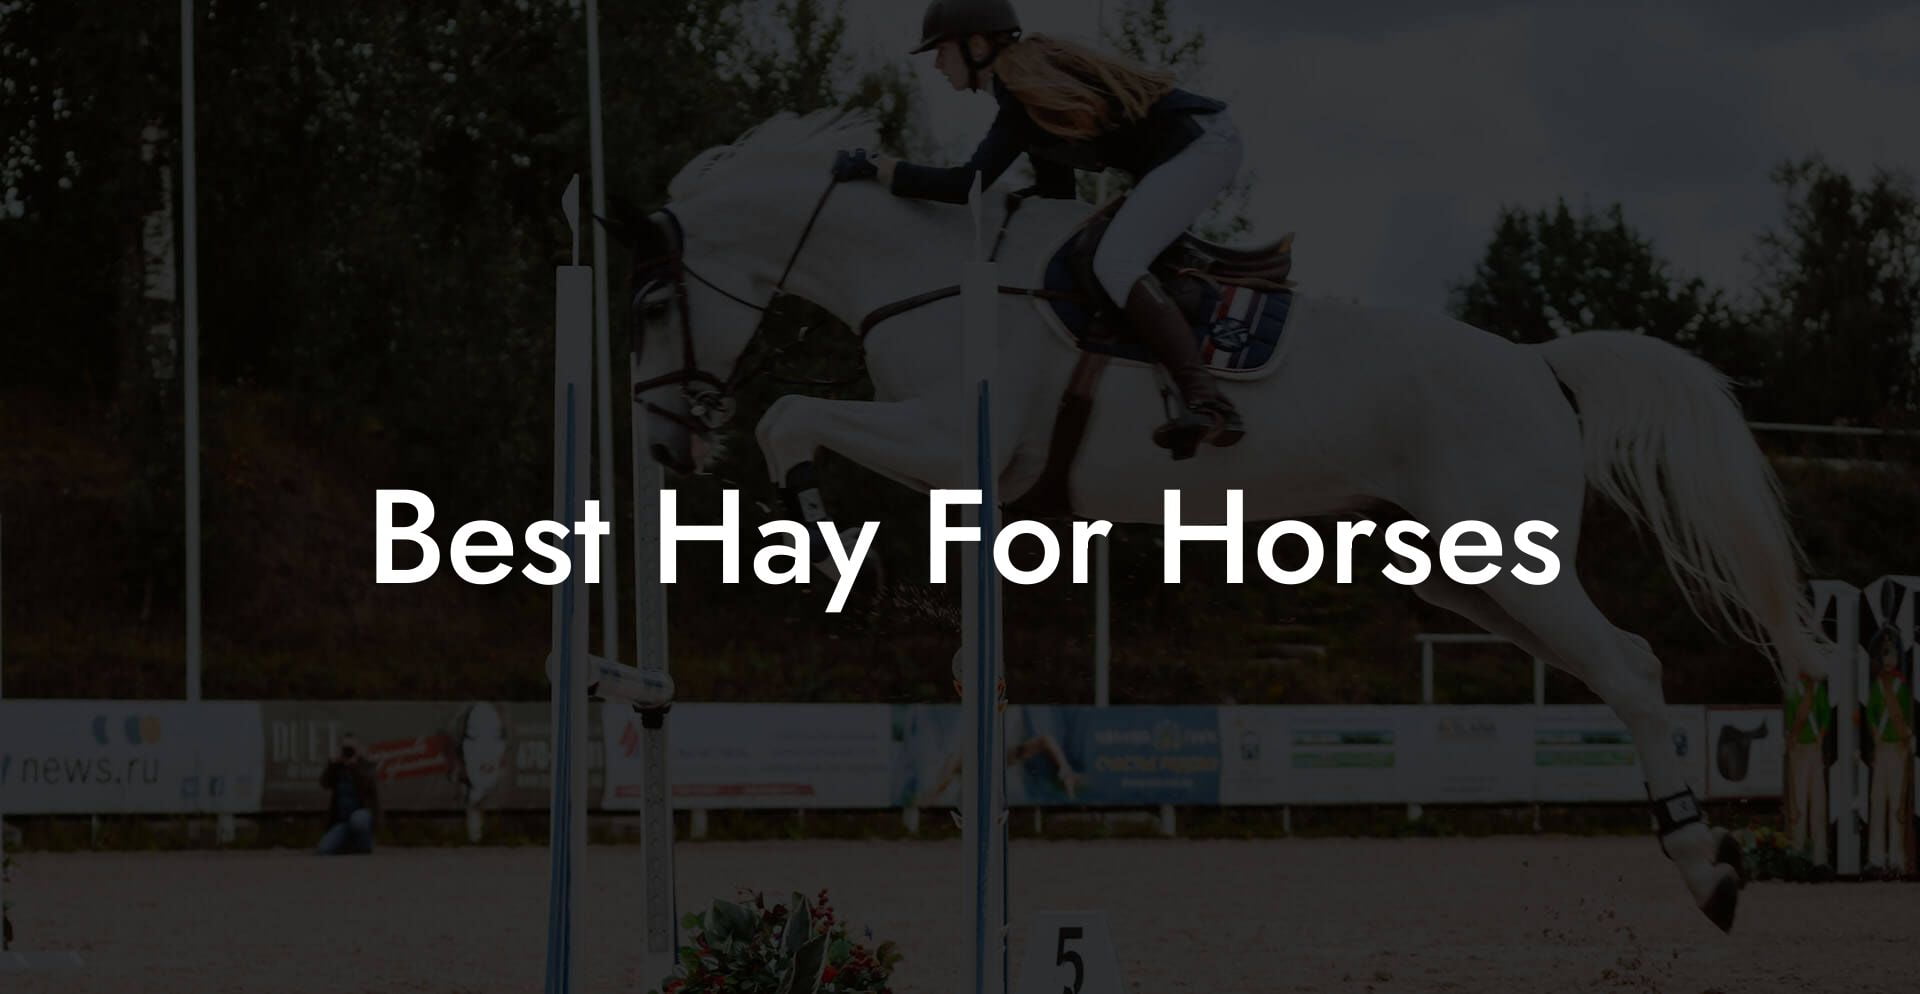 Best Hay For Horses - How To Own a Horse